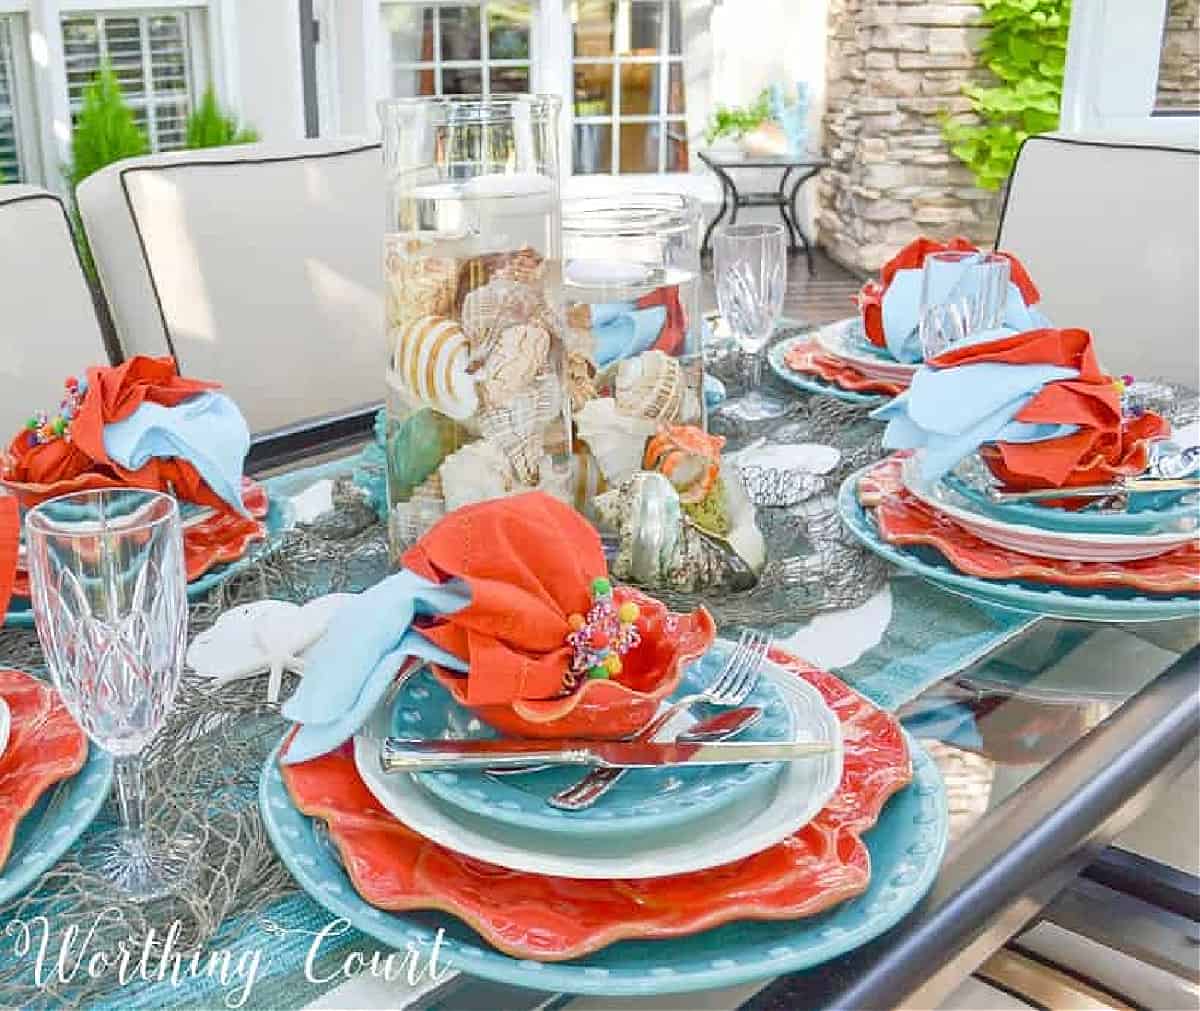 outdoor table set with blue and turquoise dishes and linens